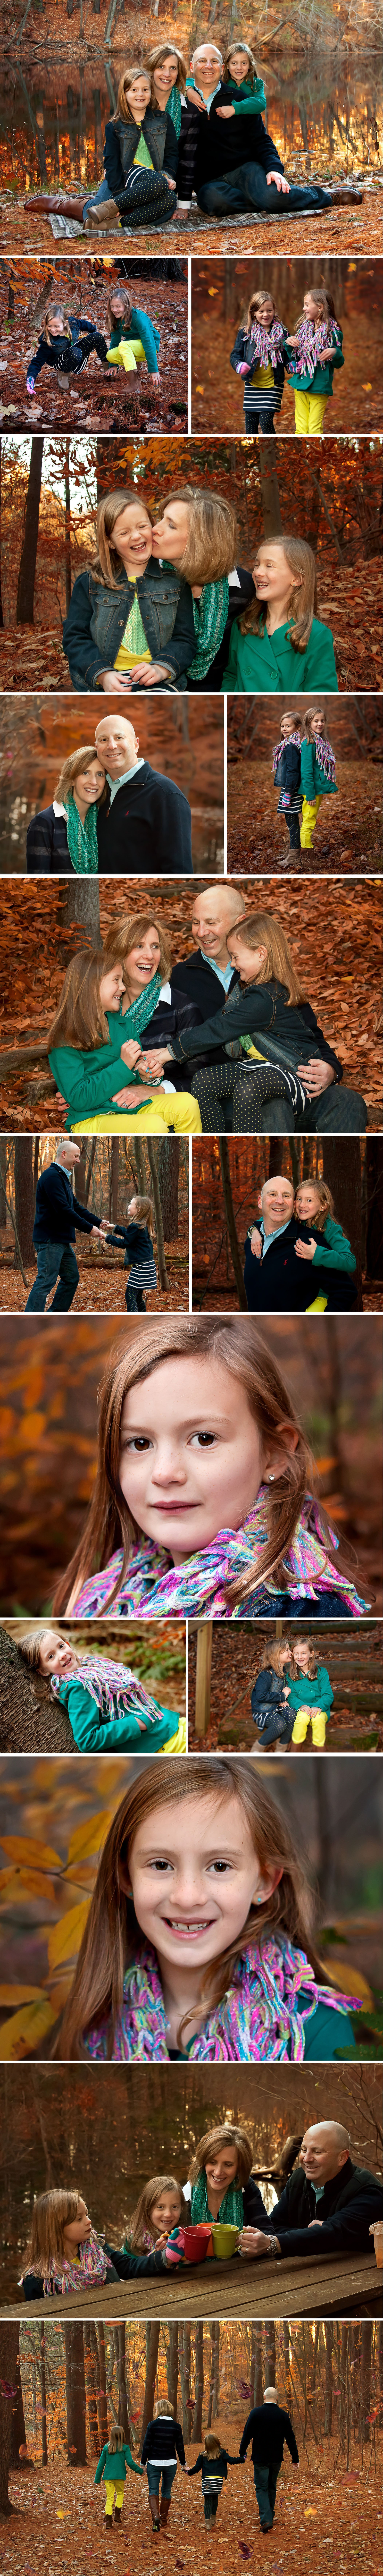 Fraternal twin 7 year old girls and their Mom and Dad in the Orange Fall Forest